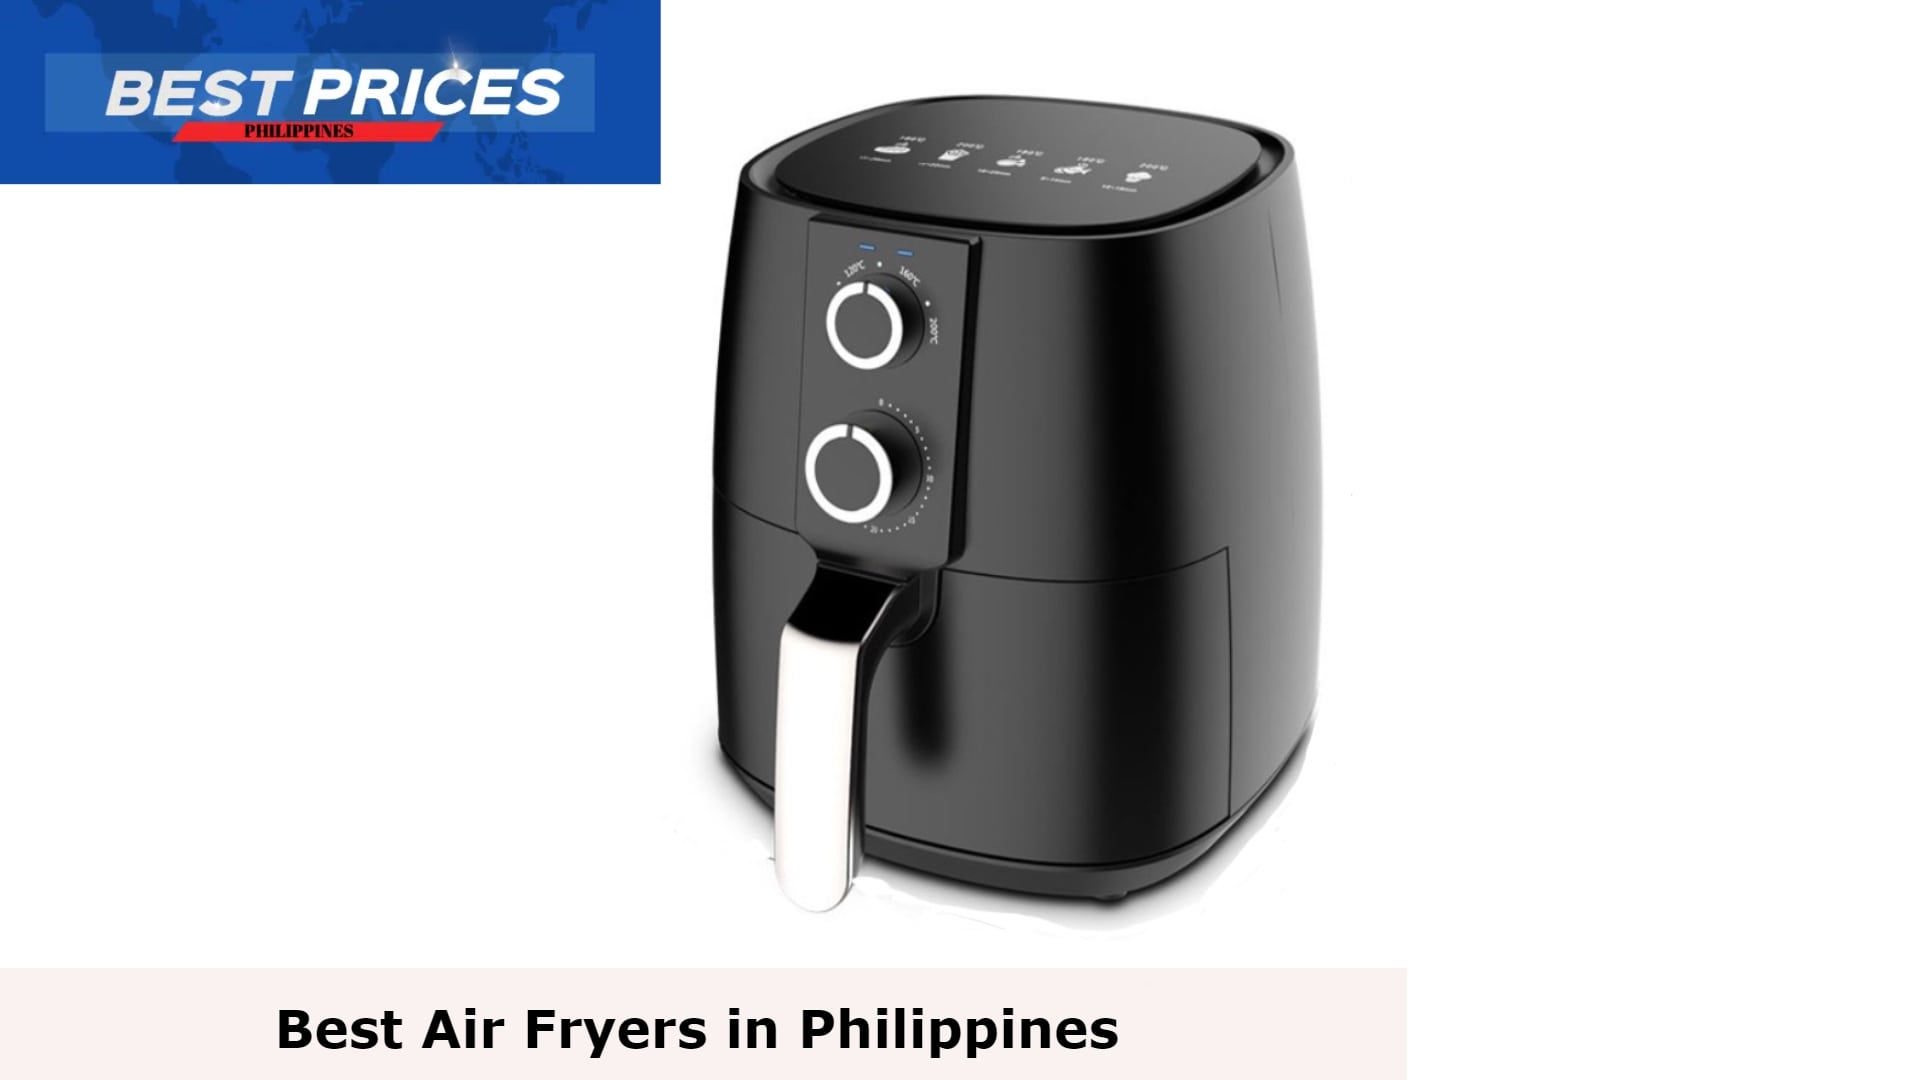 5L Multifunctional Smart Electric Air Fryer - Air Fryer Philippines, Best Air Fryers in Philippines, best air fryer review, Is Philips Air Fryer worth buying?, 10 Best Air Fryers In Philippines Ranked To Whip Up Recipes, Air Fryers Price List in Philippines, Which Air Fryer is best in Philippines?,Which is the best Airfryer to buy?,Can air fryers cause cancer?,Is it worth buying an air fryer?,What is bad about air fryers?,What are the top 10 air fryers?, What brand of air fryer is best in the Philippines?, How much is fryer in Philippines?, What is the best brand of air fryer to purchase?, How much is Philips Airfryer in Philippines?, Where to buy Air fryer Philippines,